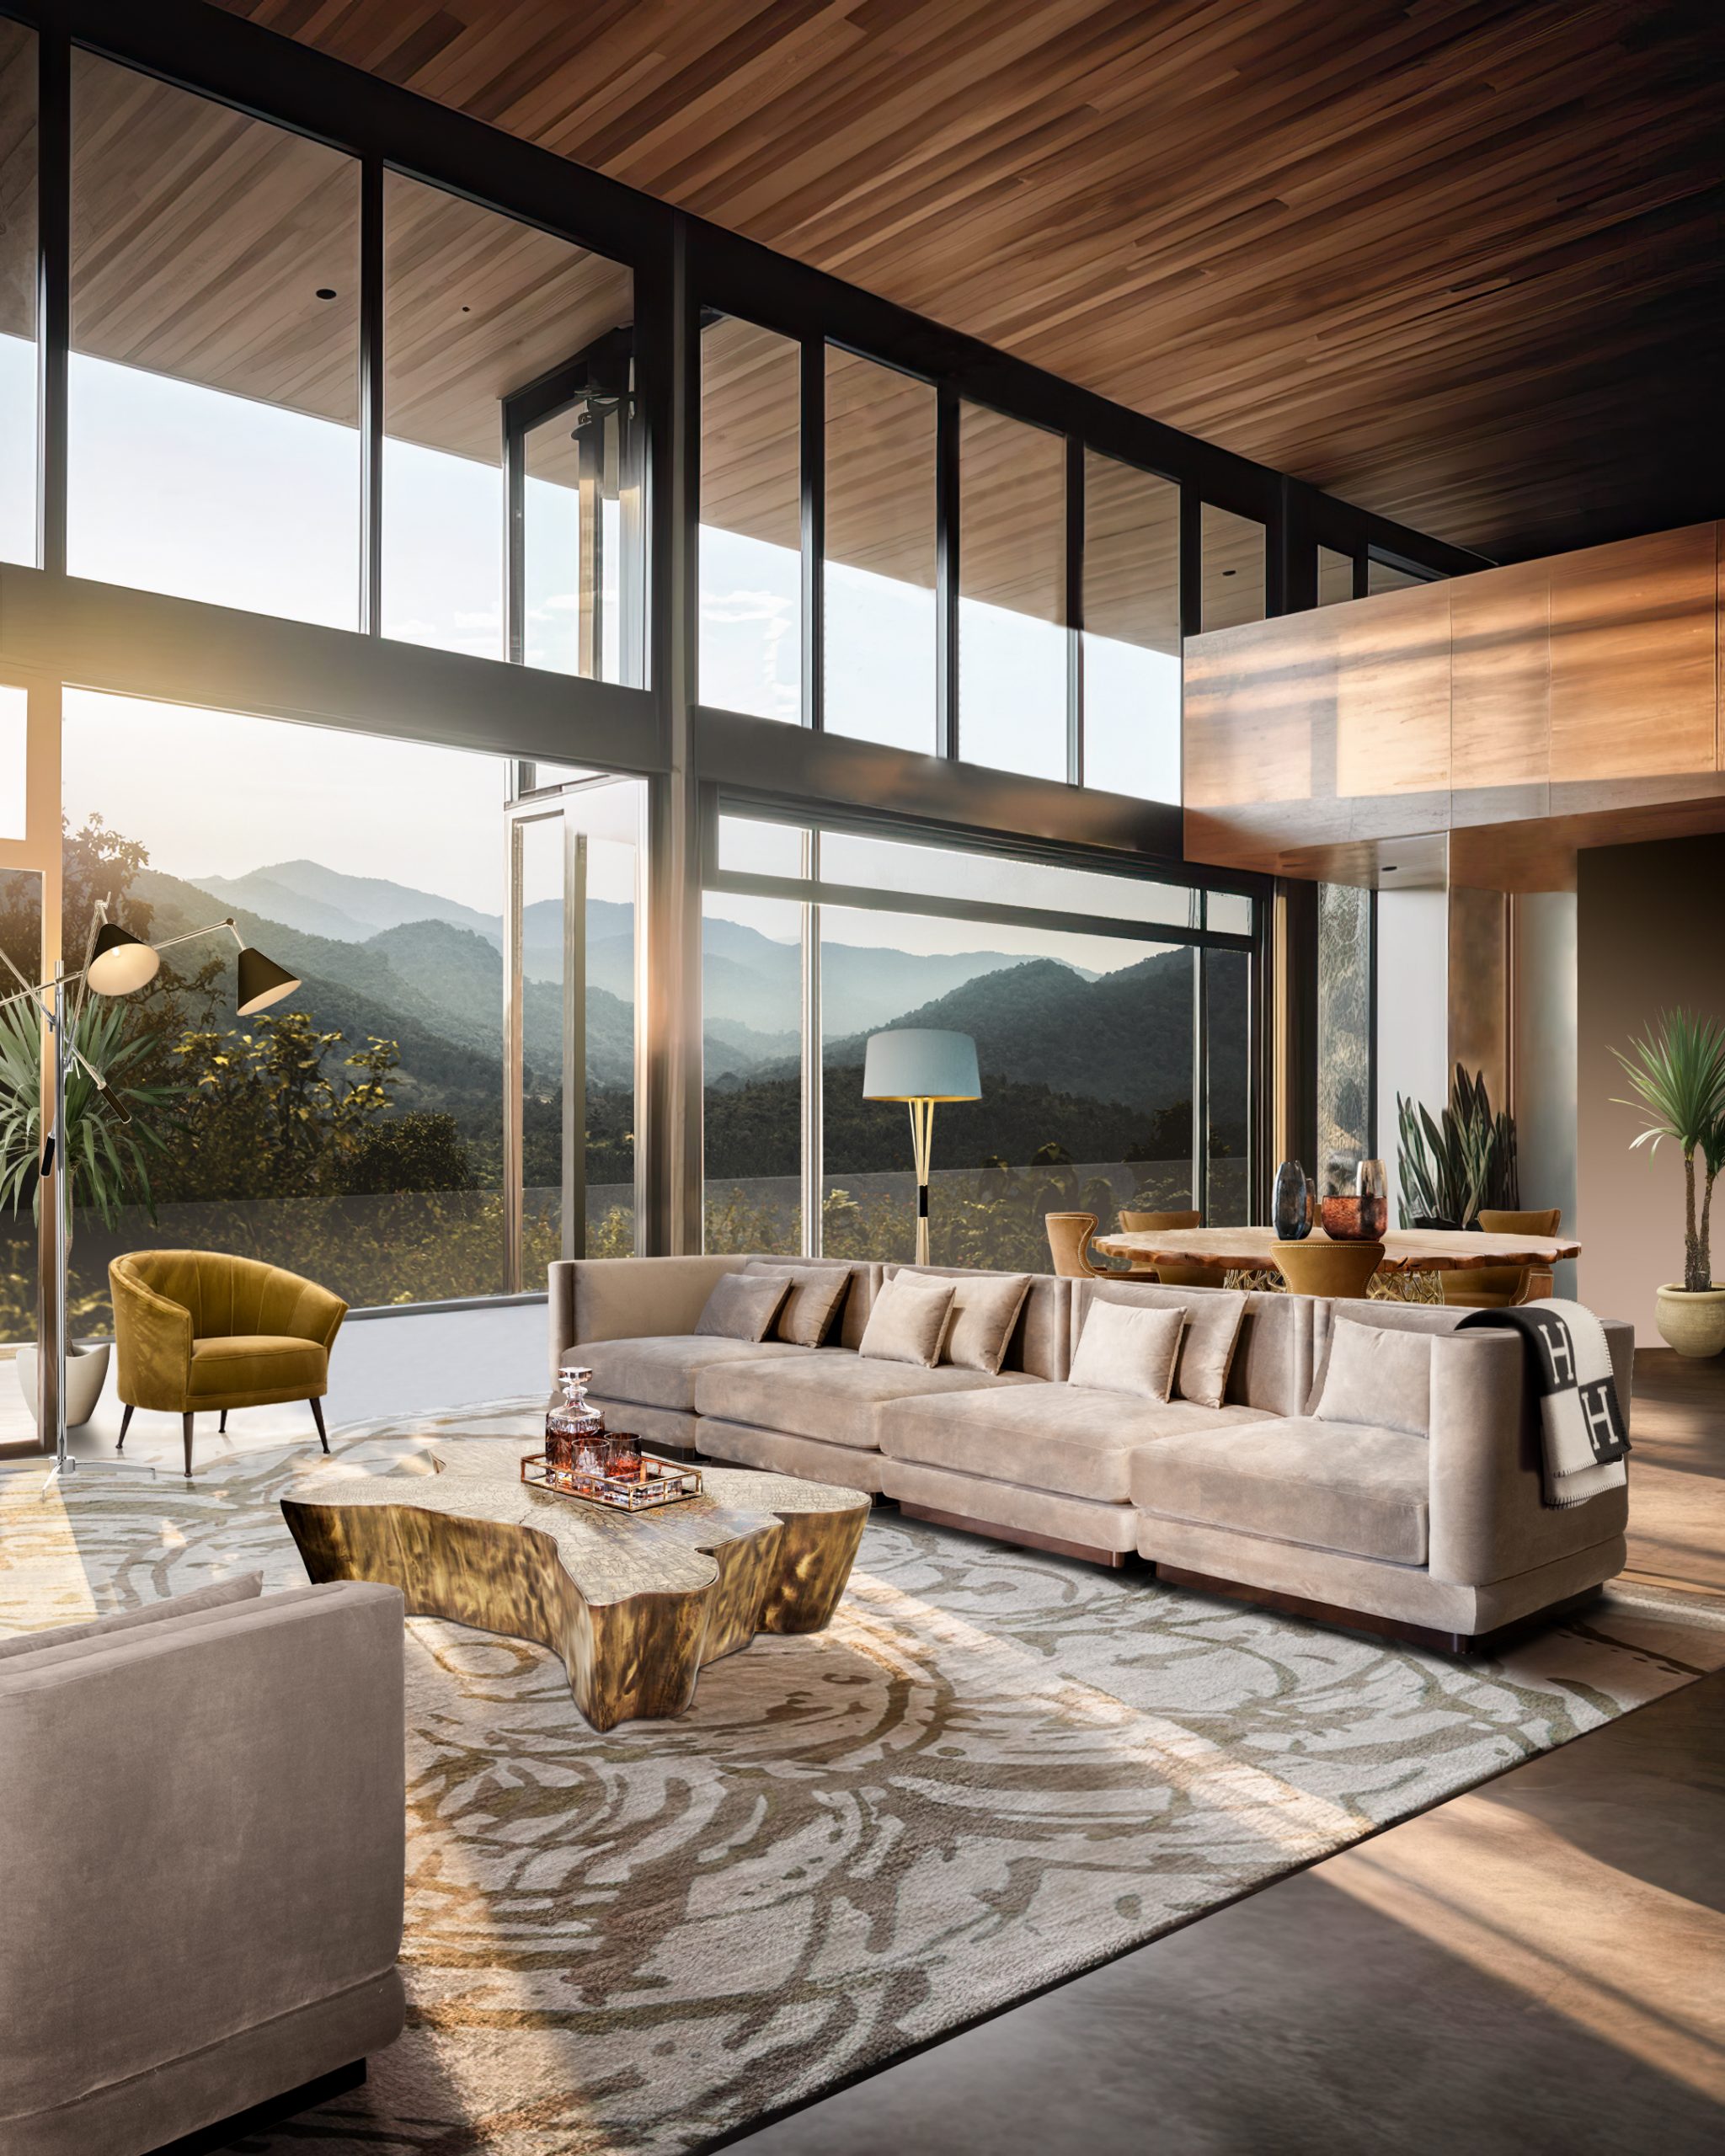 Luxurious Summer Living: Top Interior Design Tips for Your Luxury Home